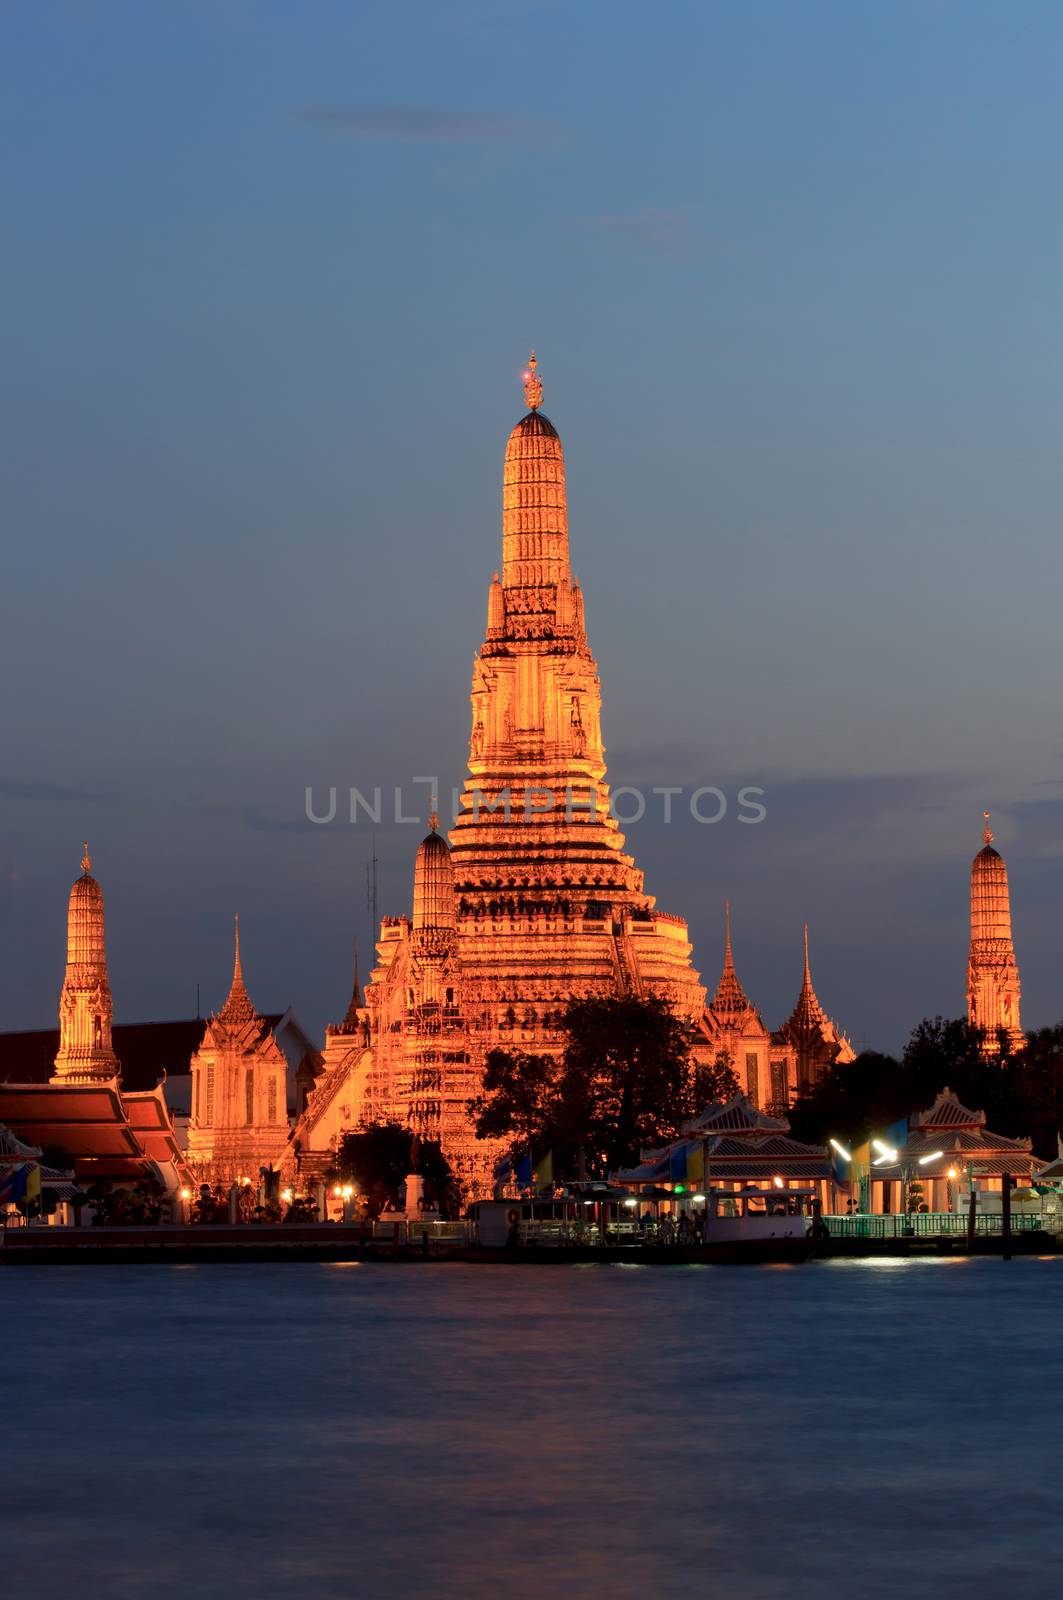 The scene of the Temple of Down (Wat Arun) in the night.